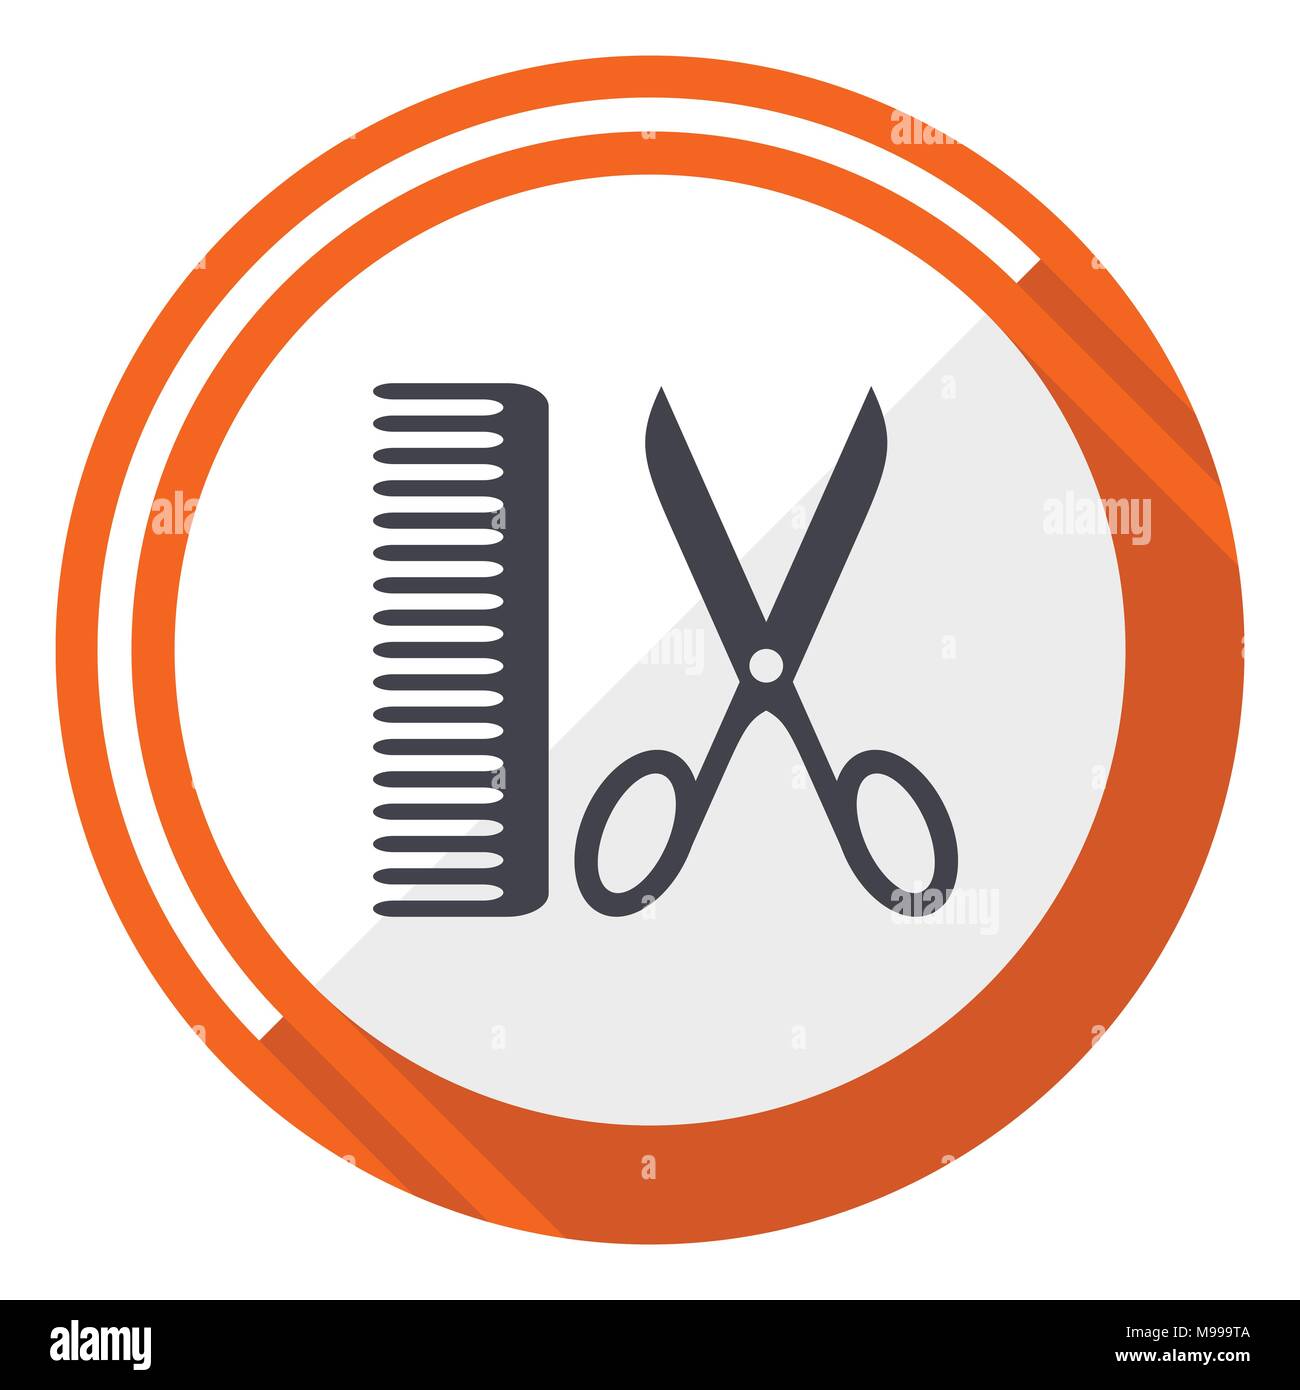 Barber flat design vector web icon. Round orange internet button isolated on white background. Stock Vector